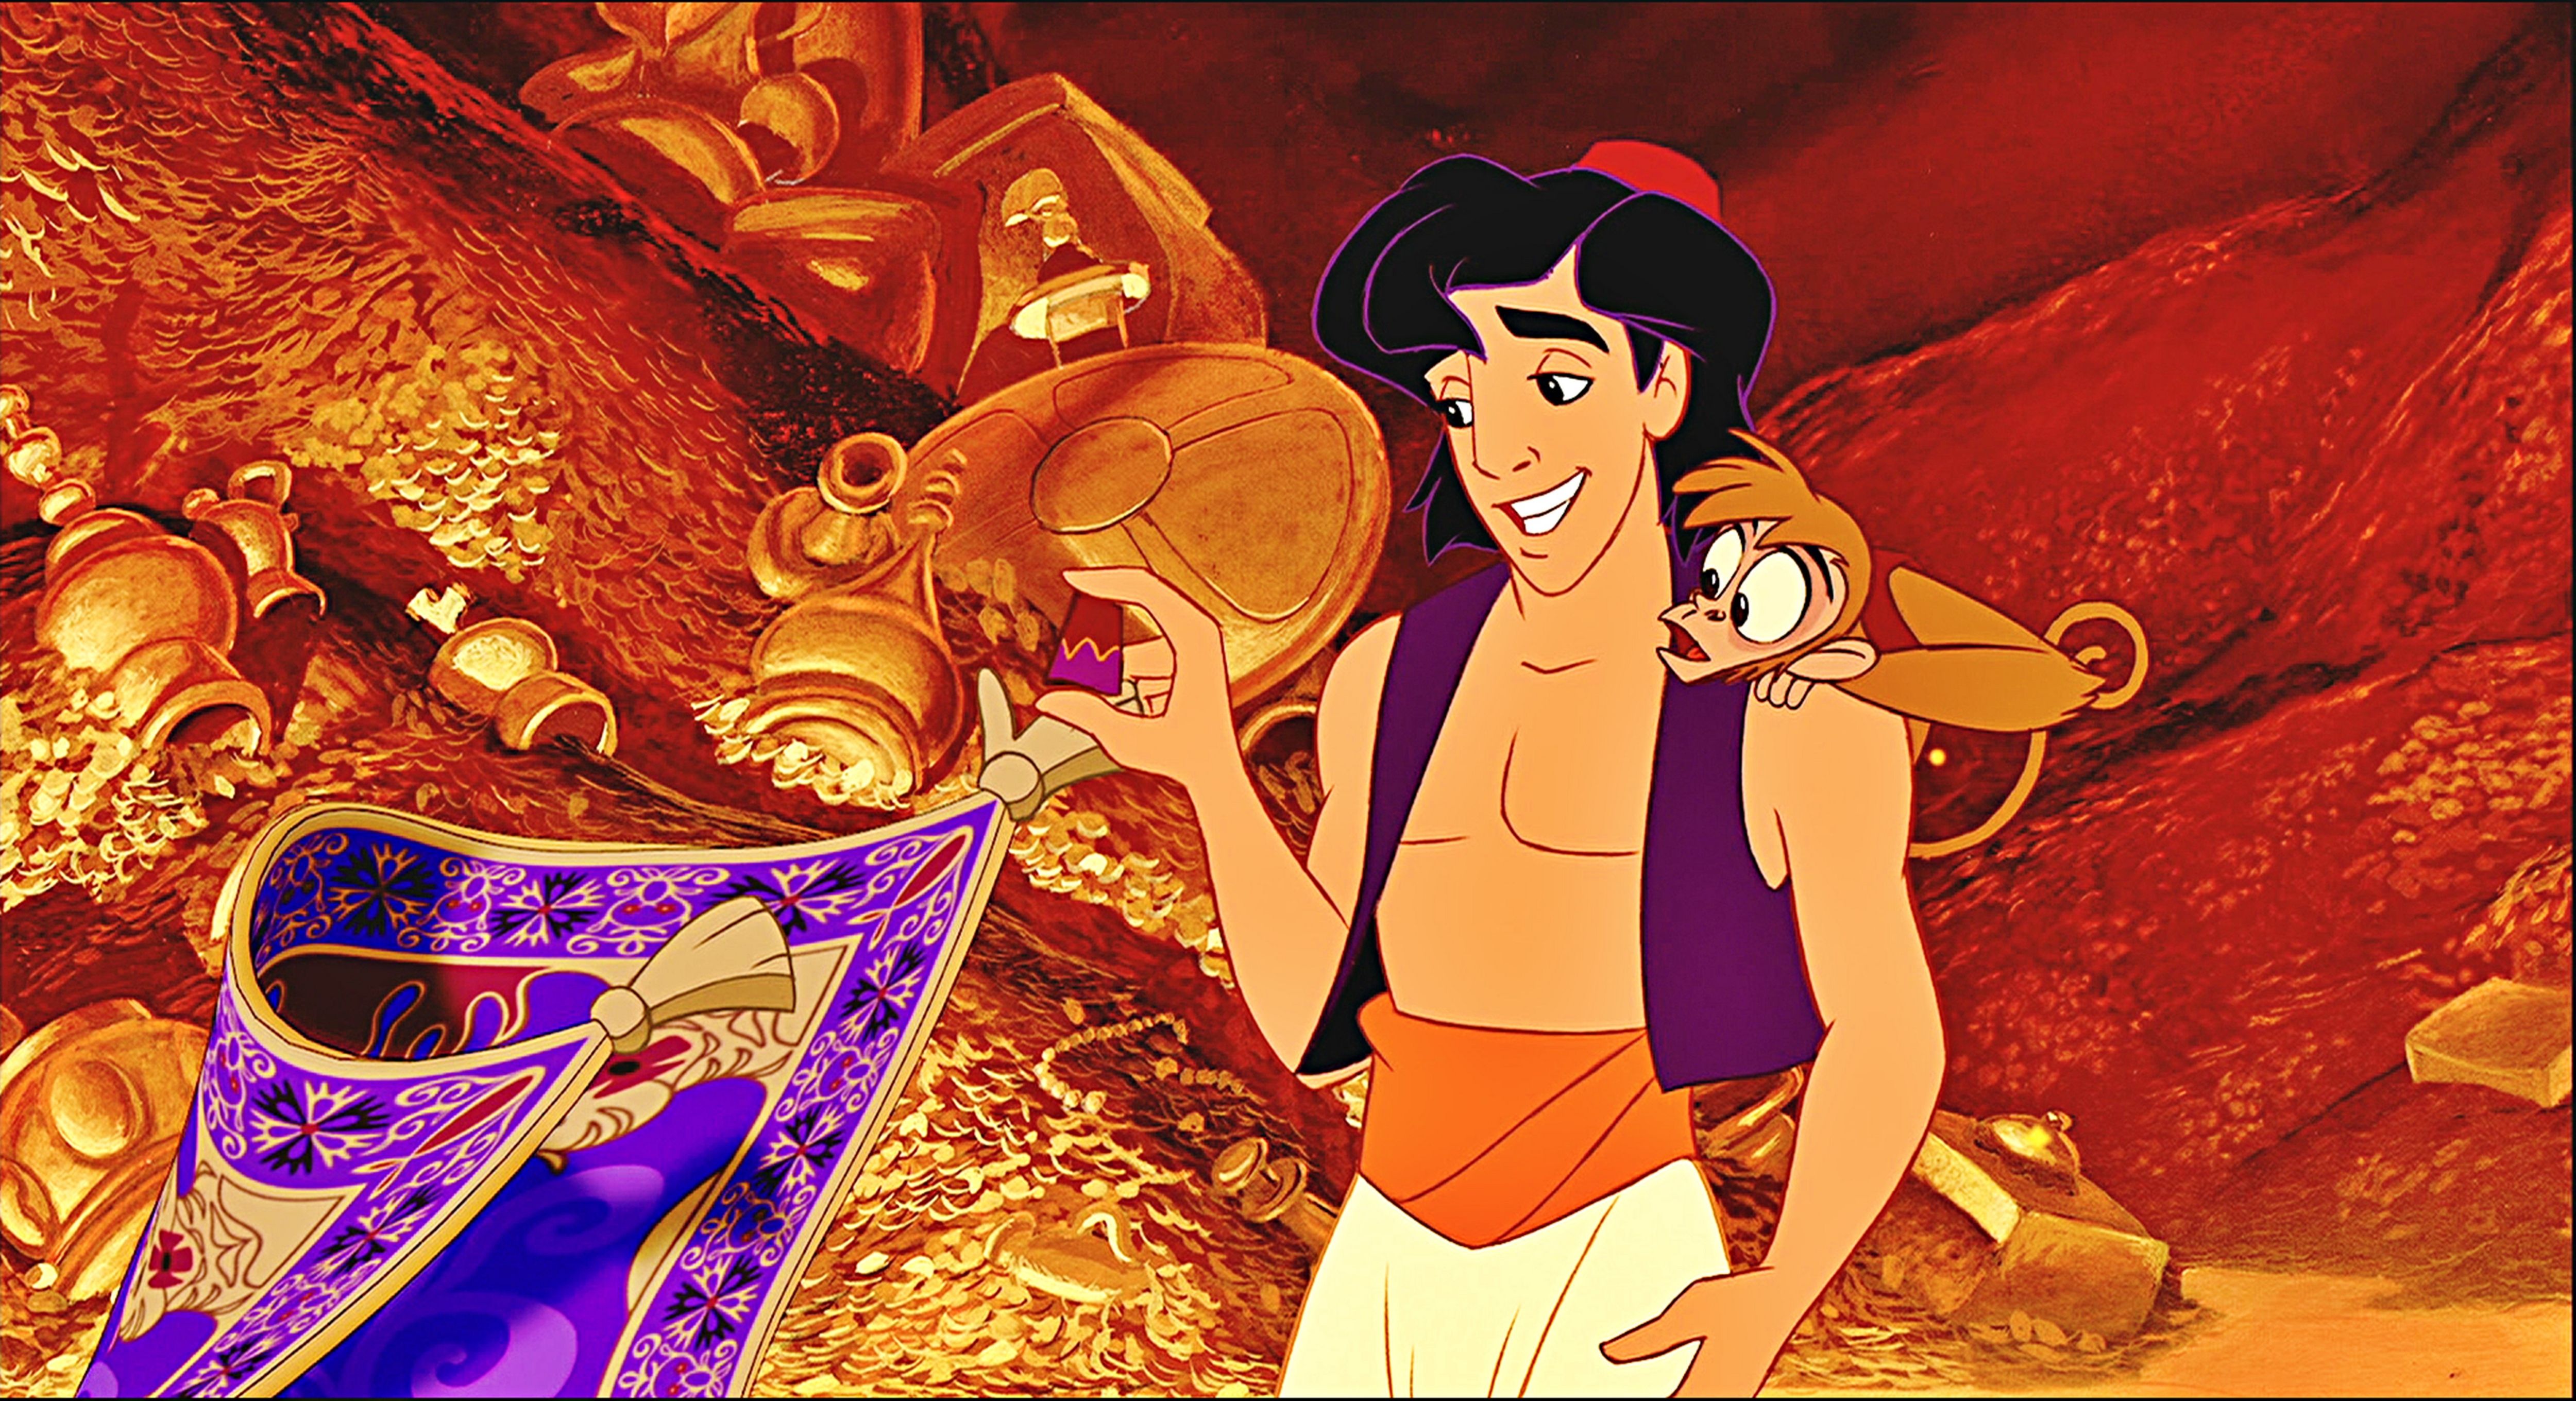 Disney Characters Inspired By Real Life People You'd Never Expect, From Aladdin To Pocahontas